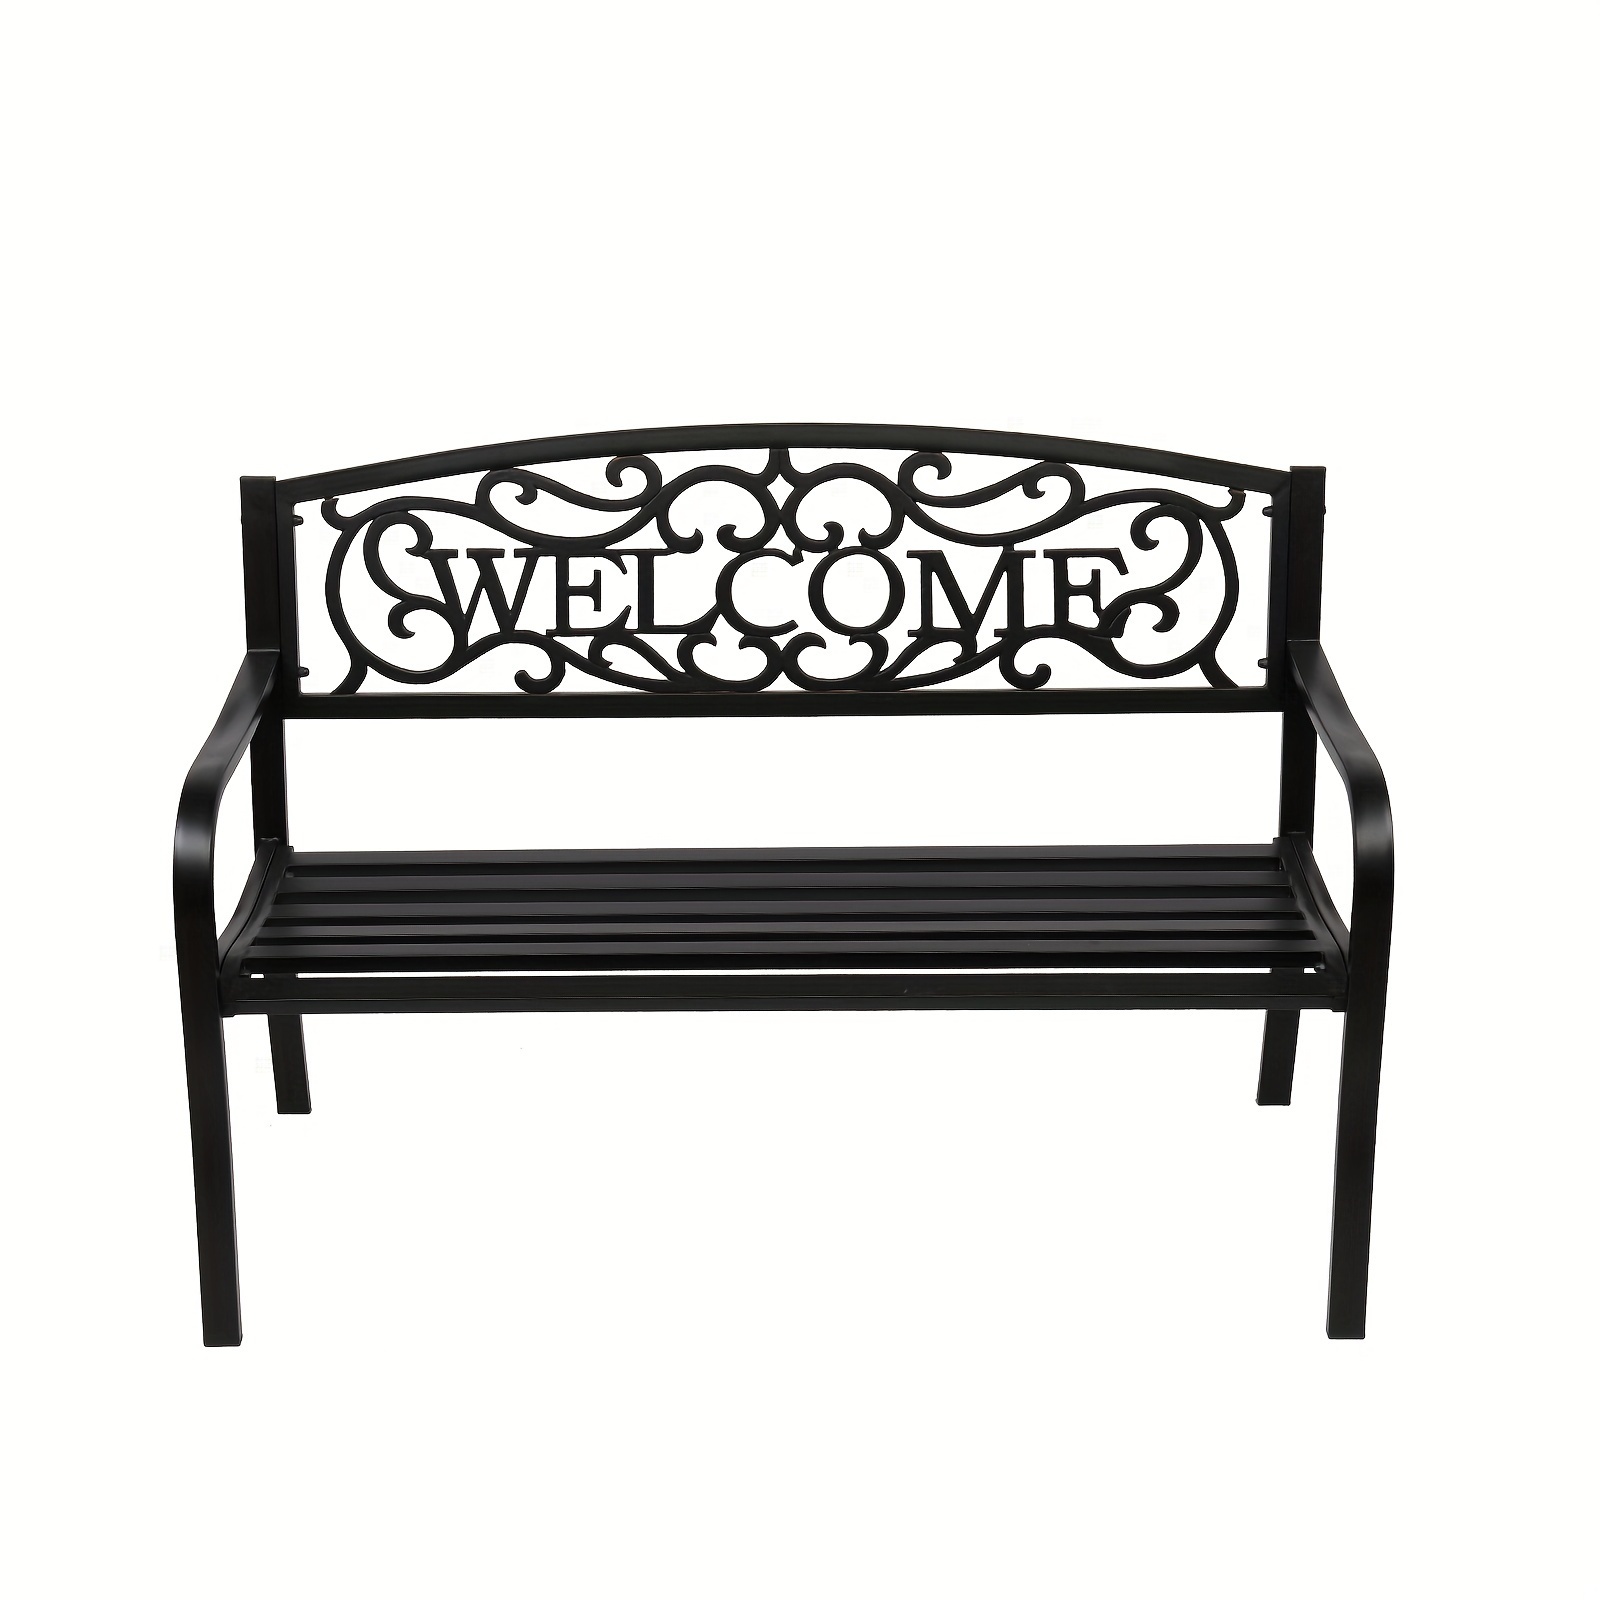 

Outdoor Steel Garden Bench Park Bench, 50 Inch Patio Welcome Bench With Slated Seat & Floral Design Backrest